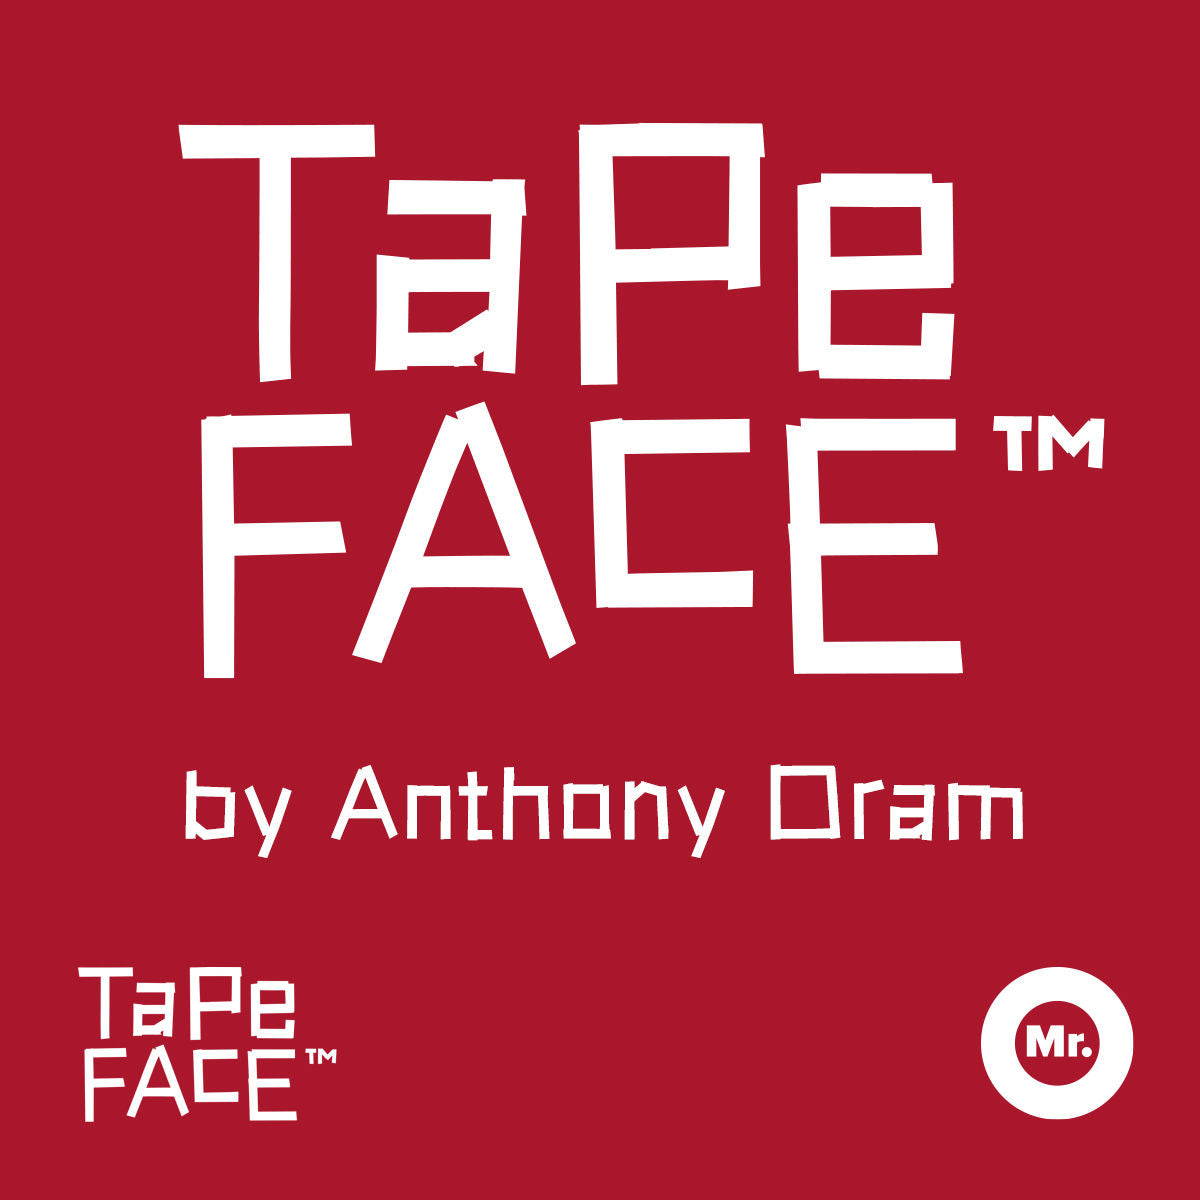 Tape-Face™ Typeface